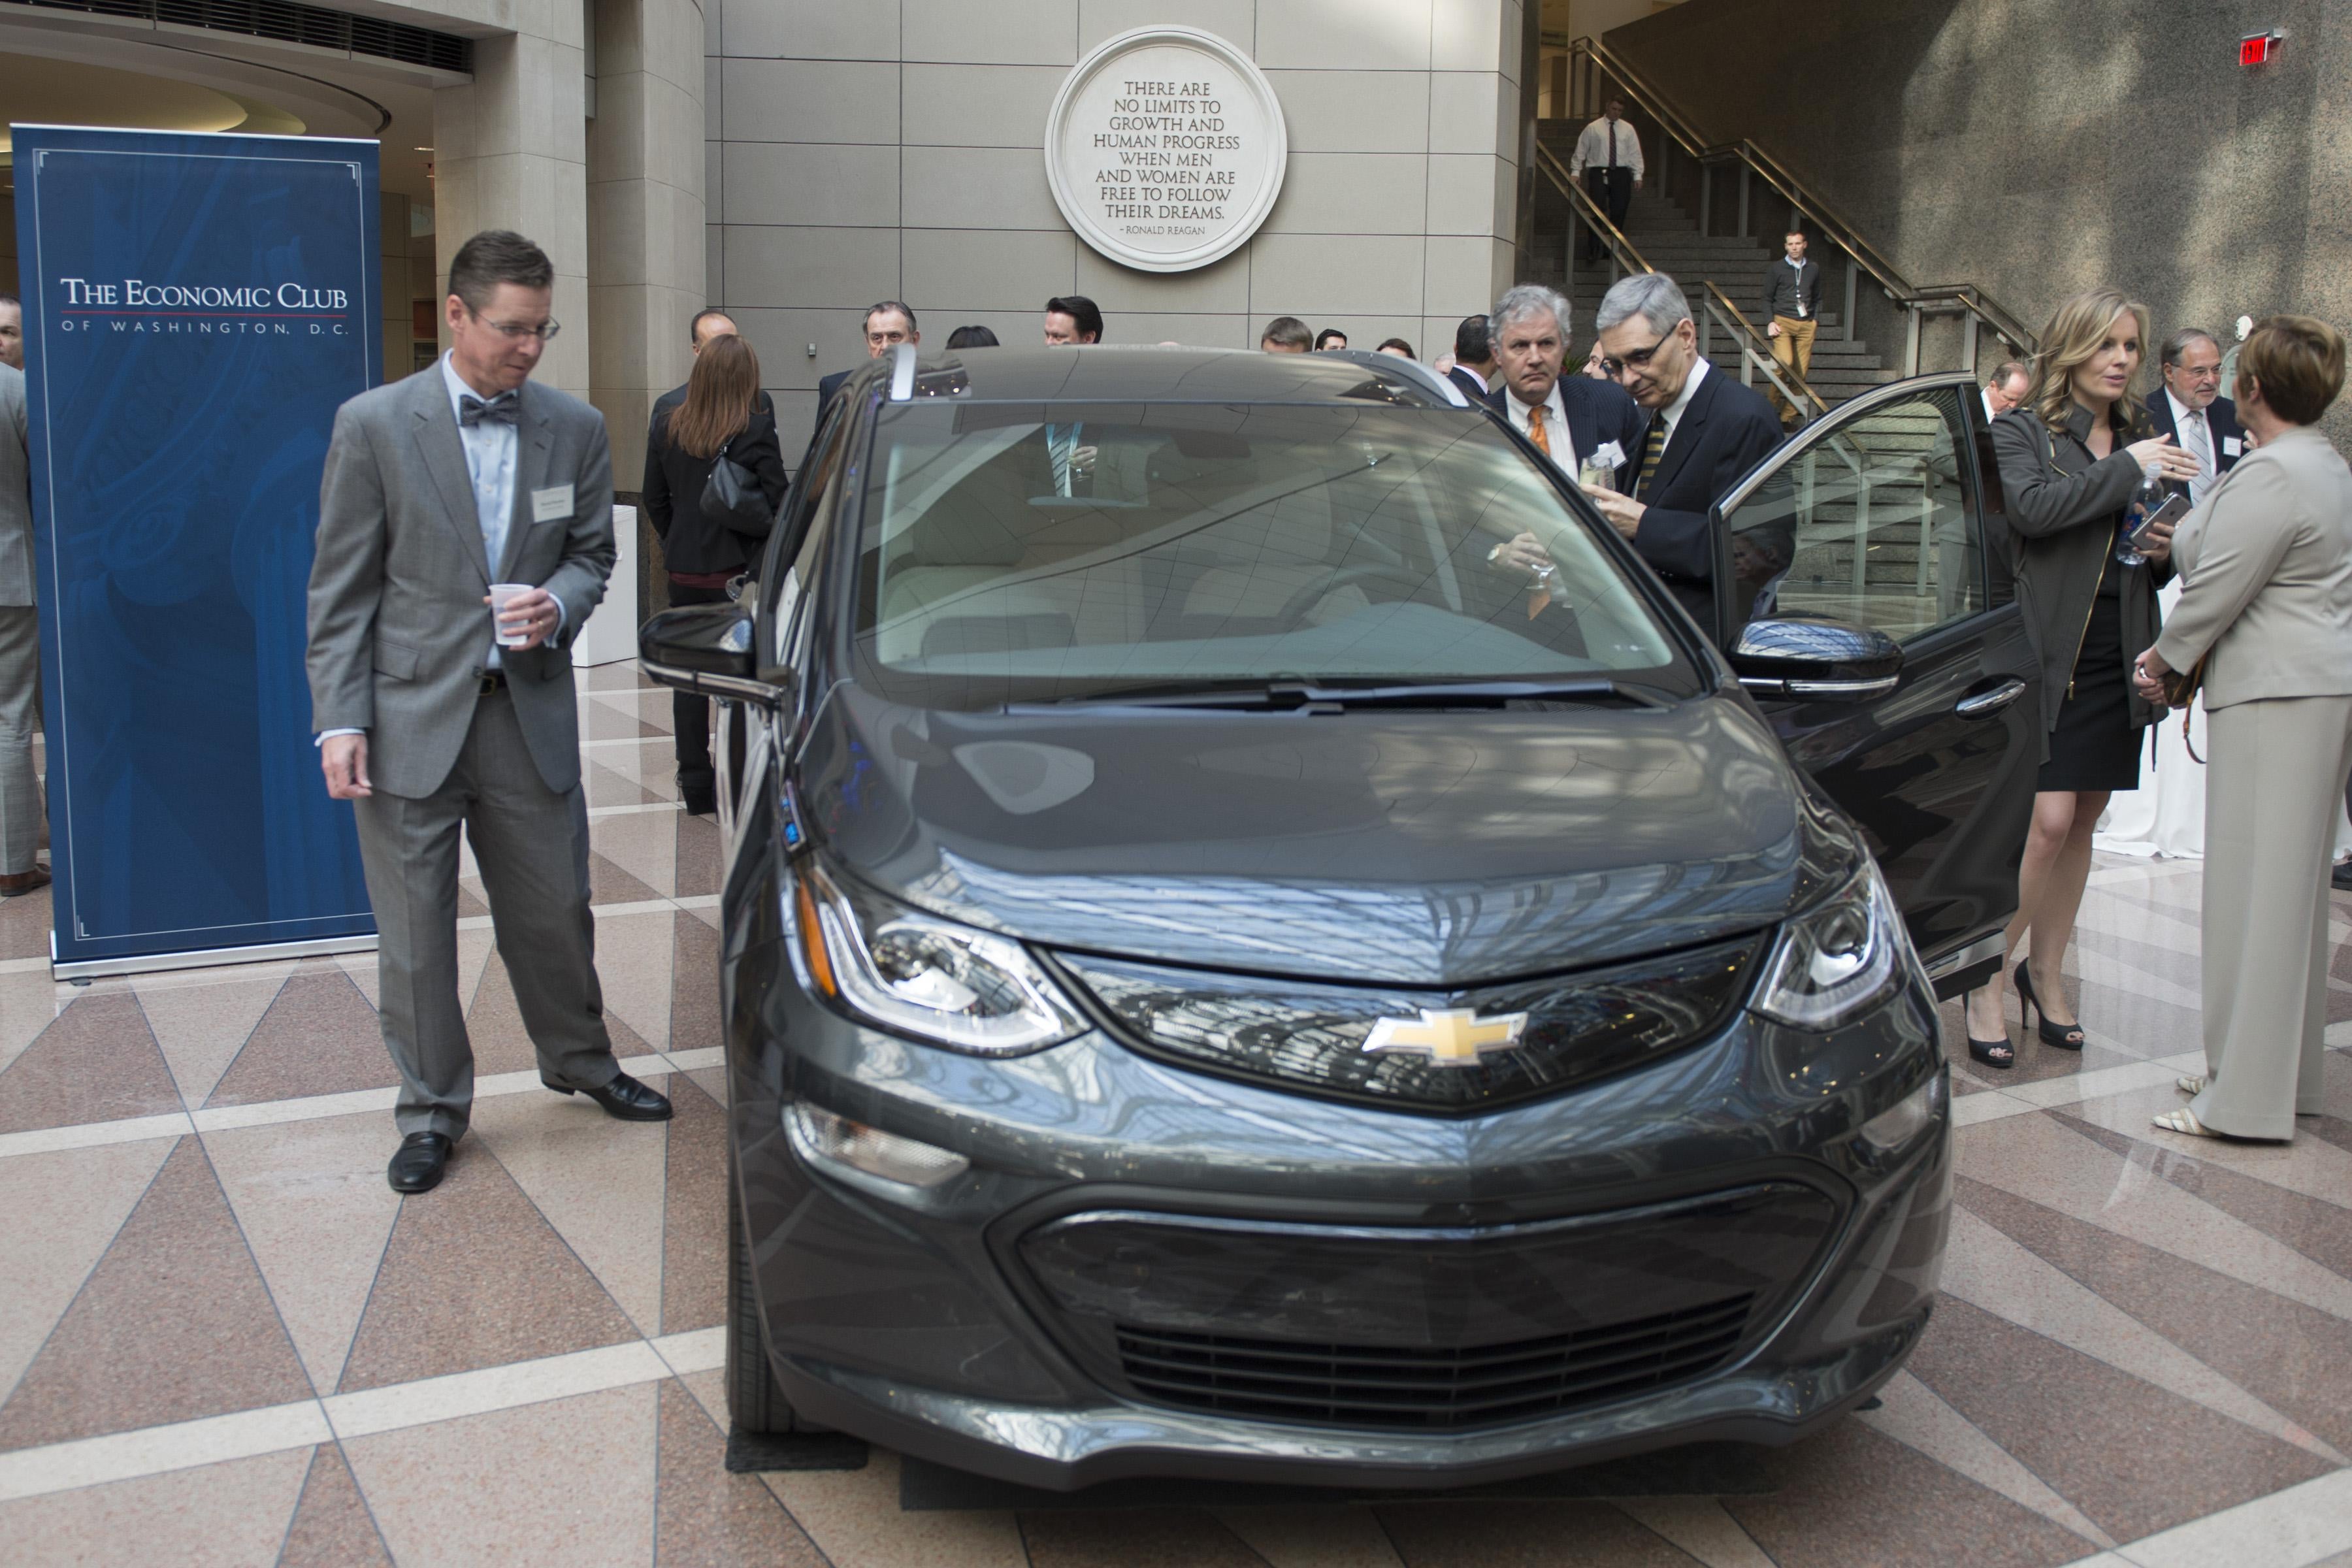 A Chevrolet Bolt on display